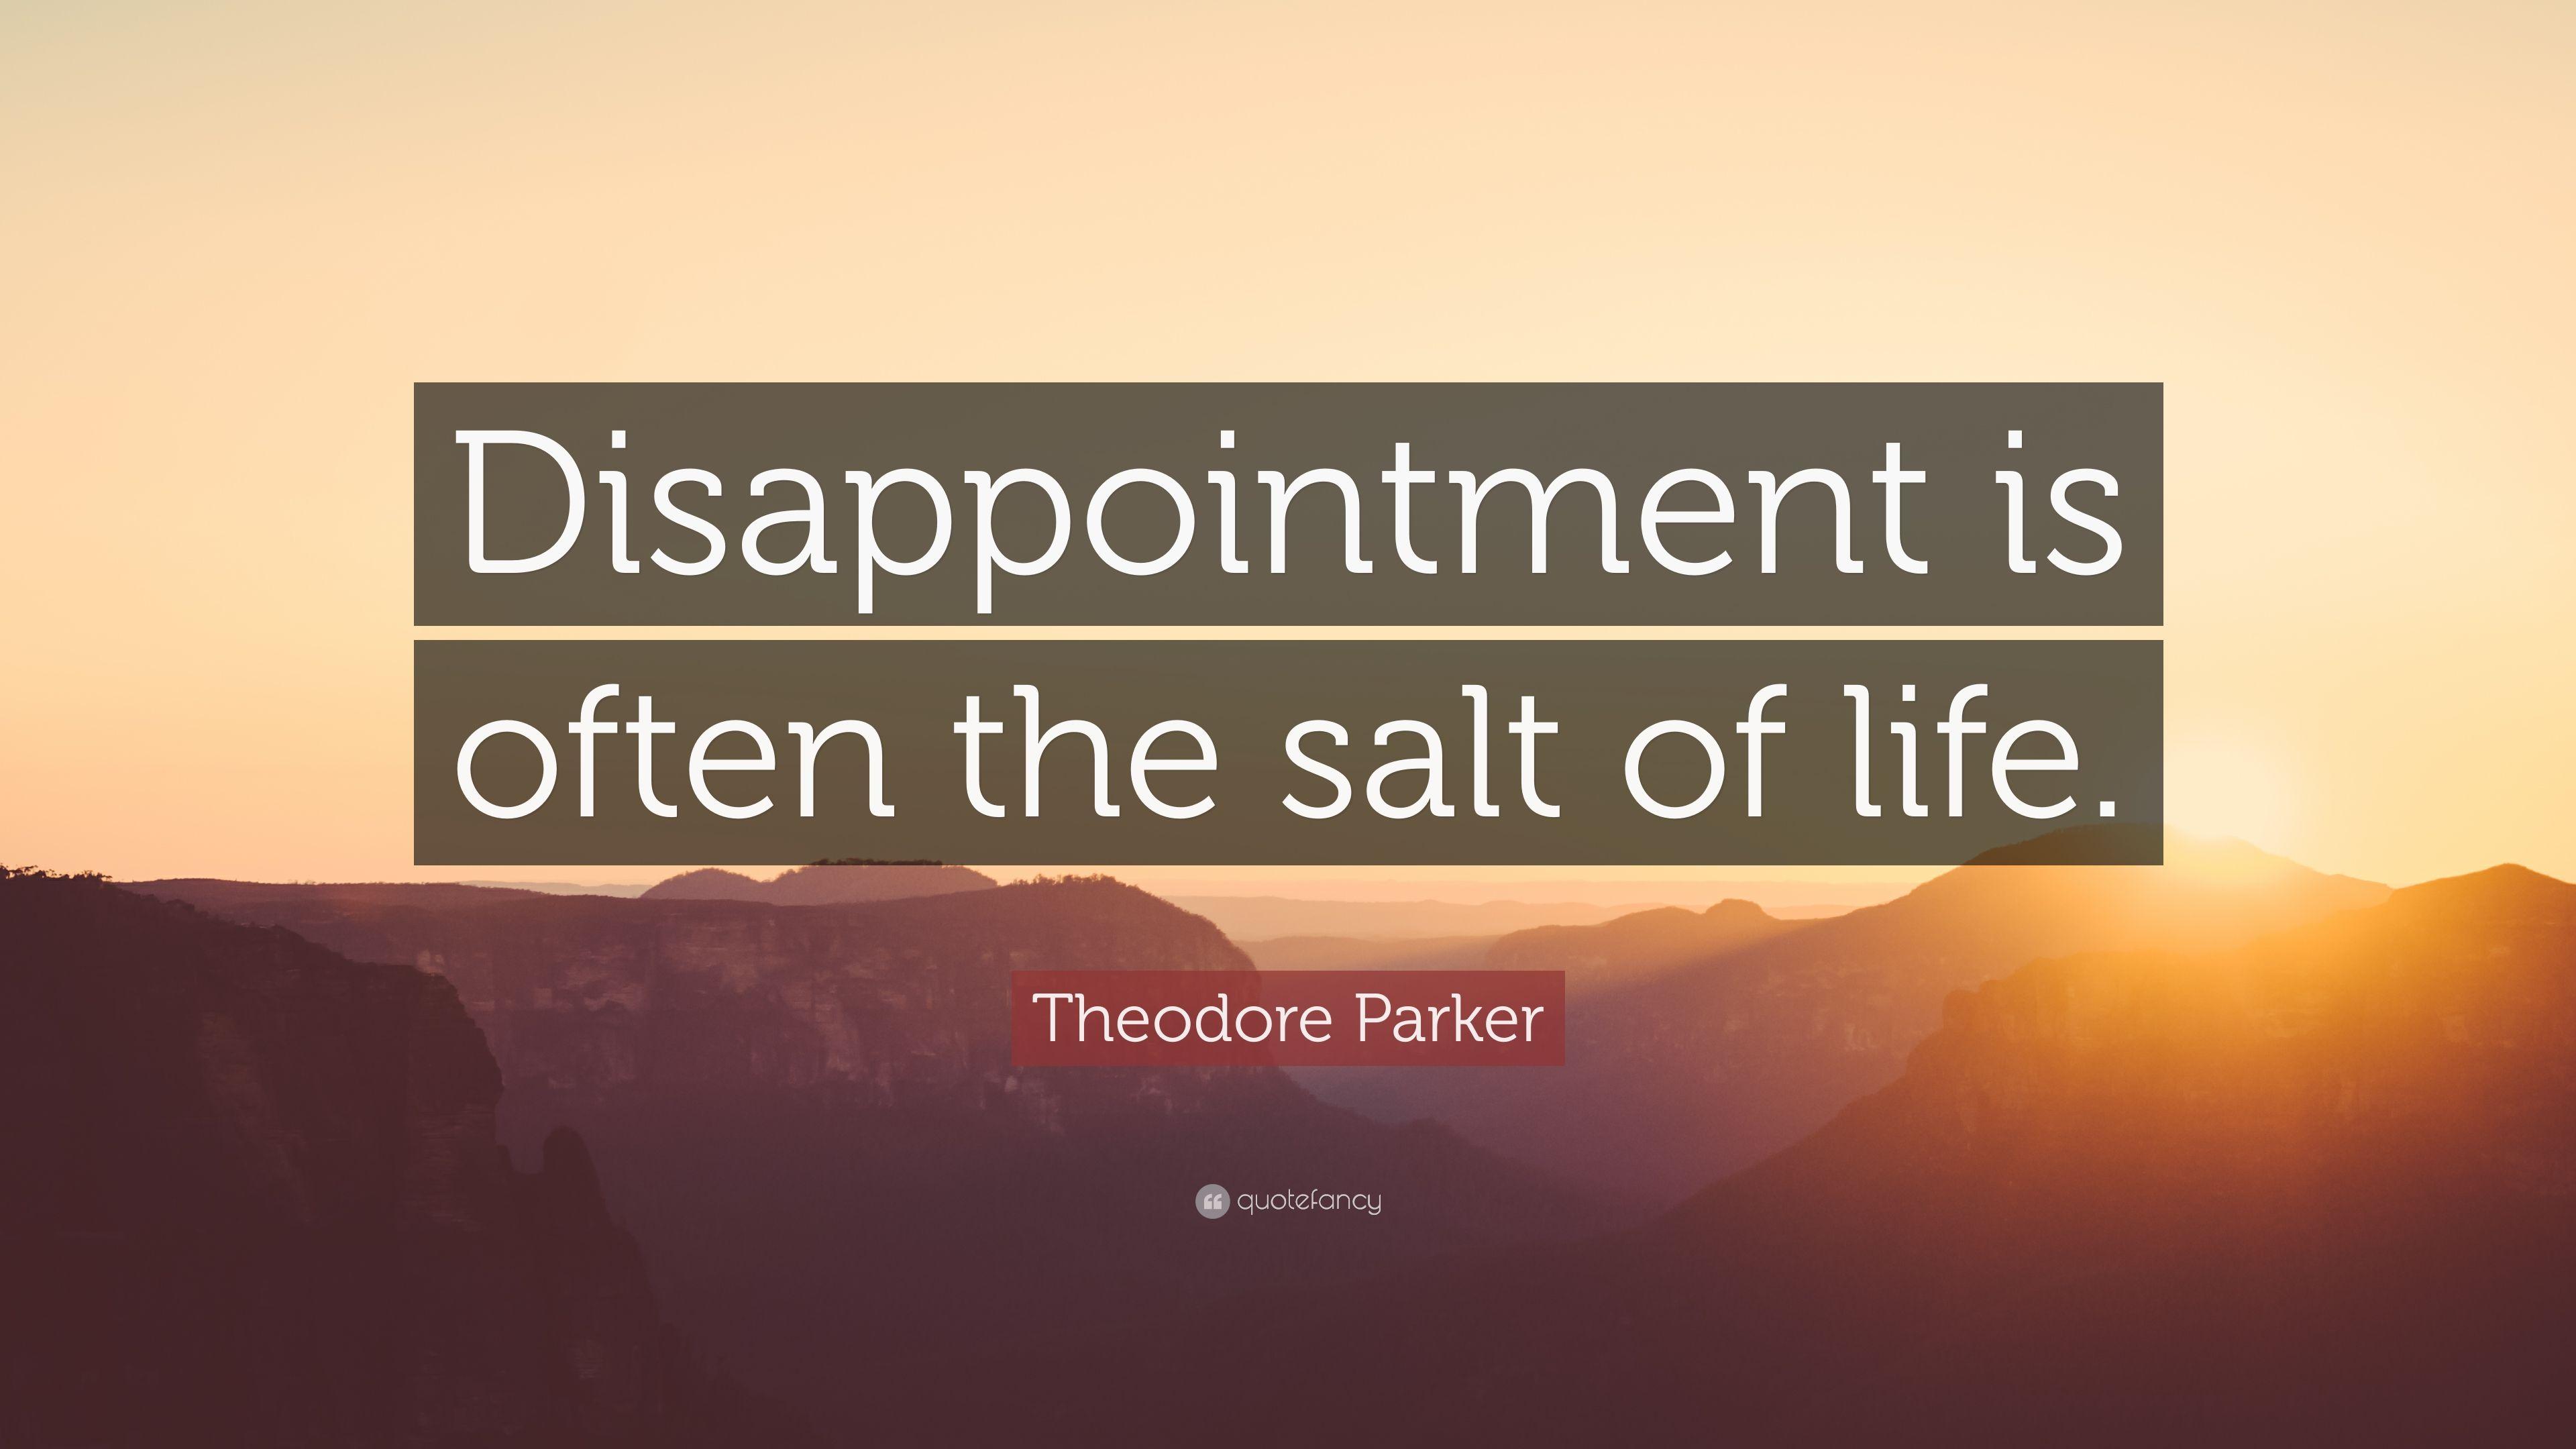 Theodore Parker Quote: “Disappointment is often the salt of life